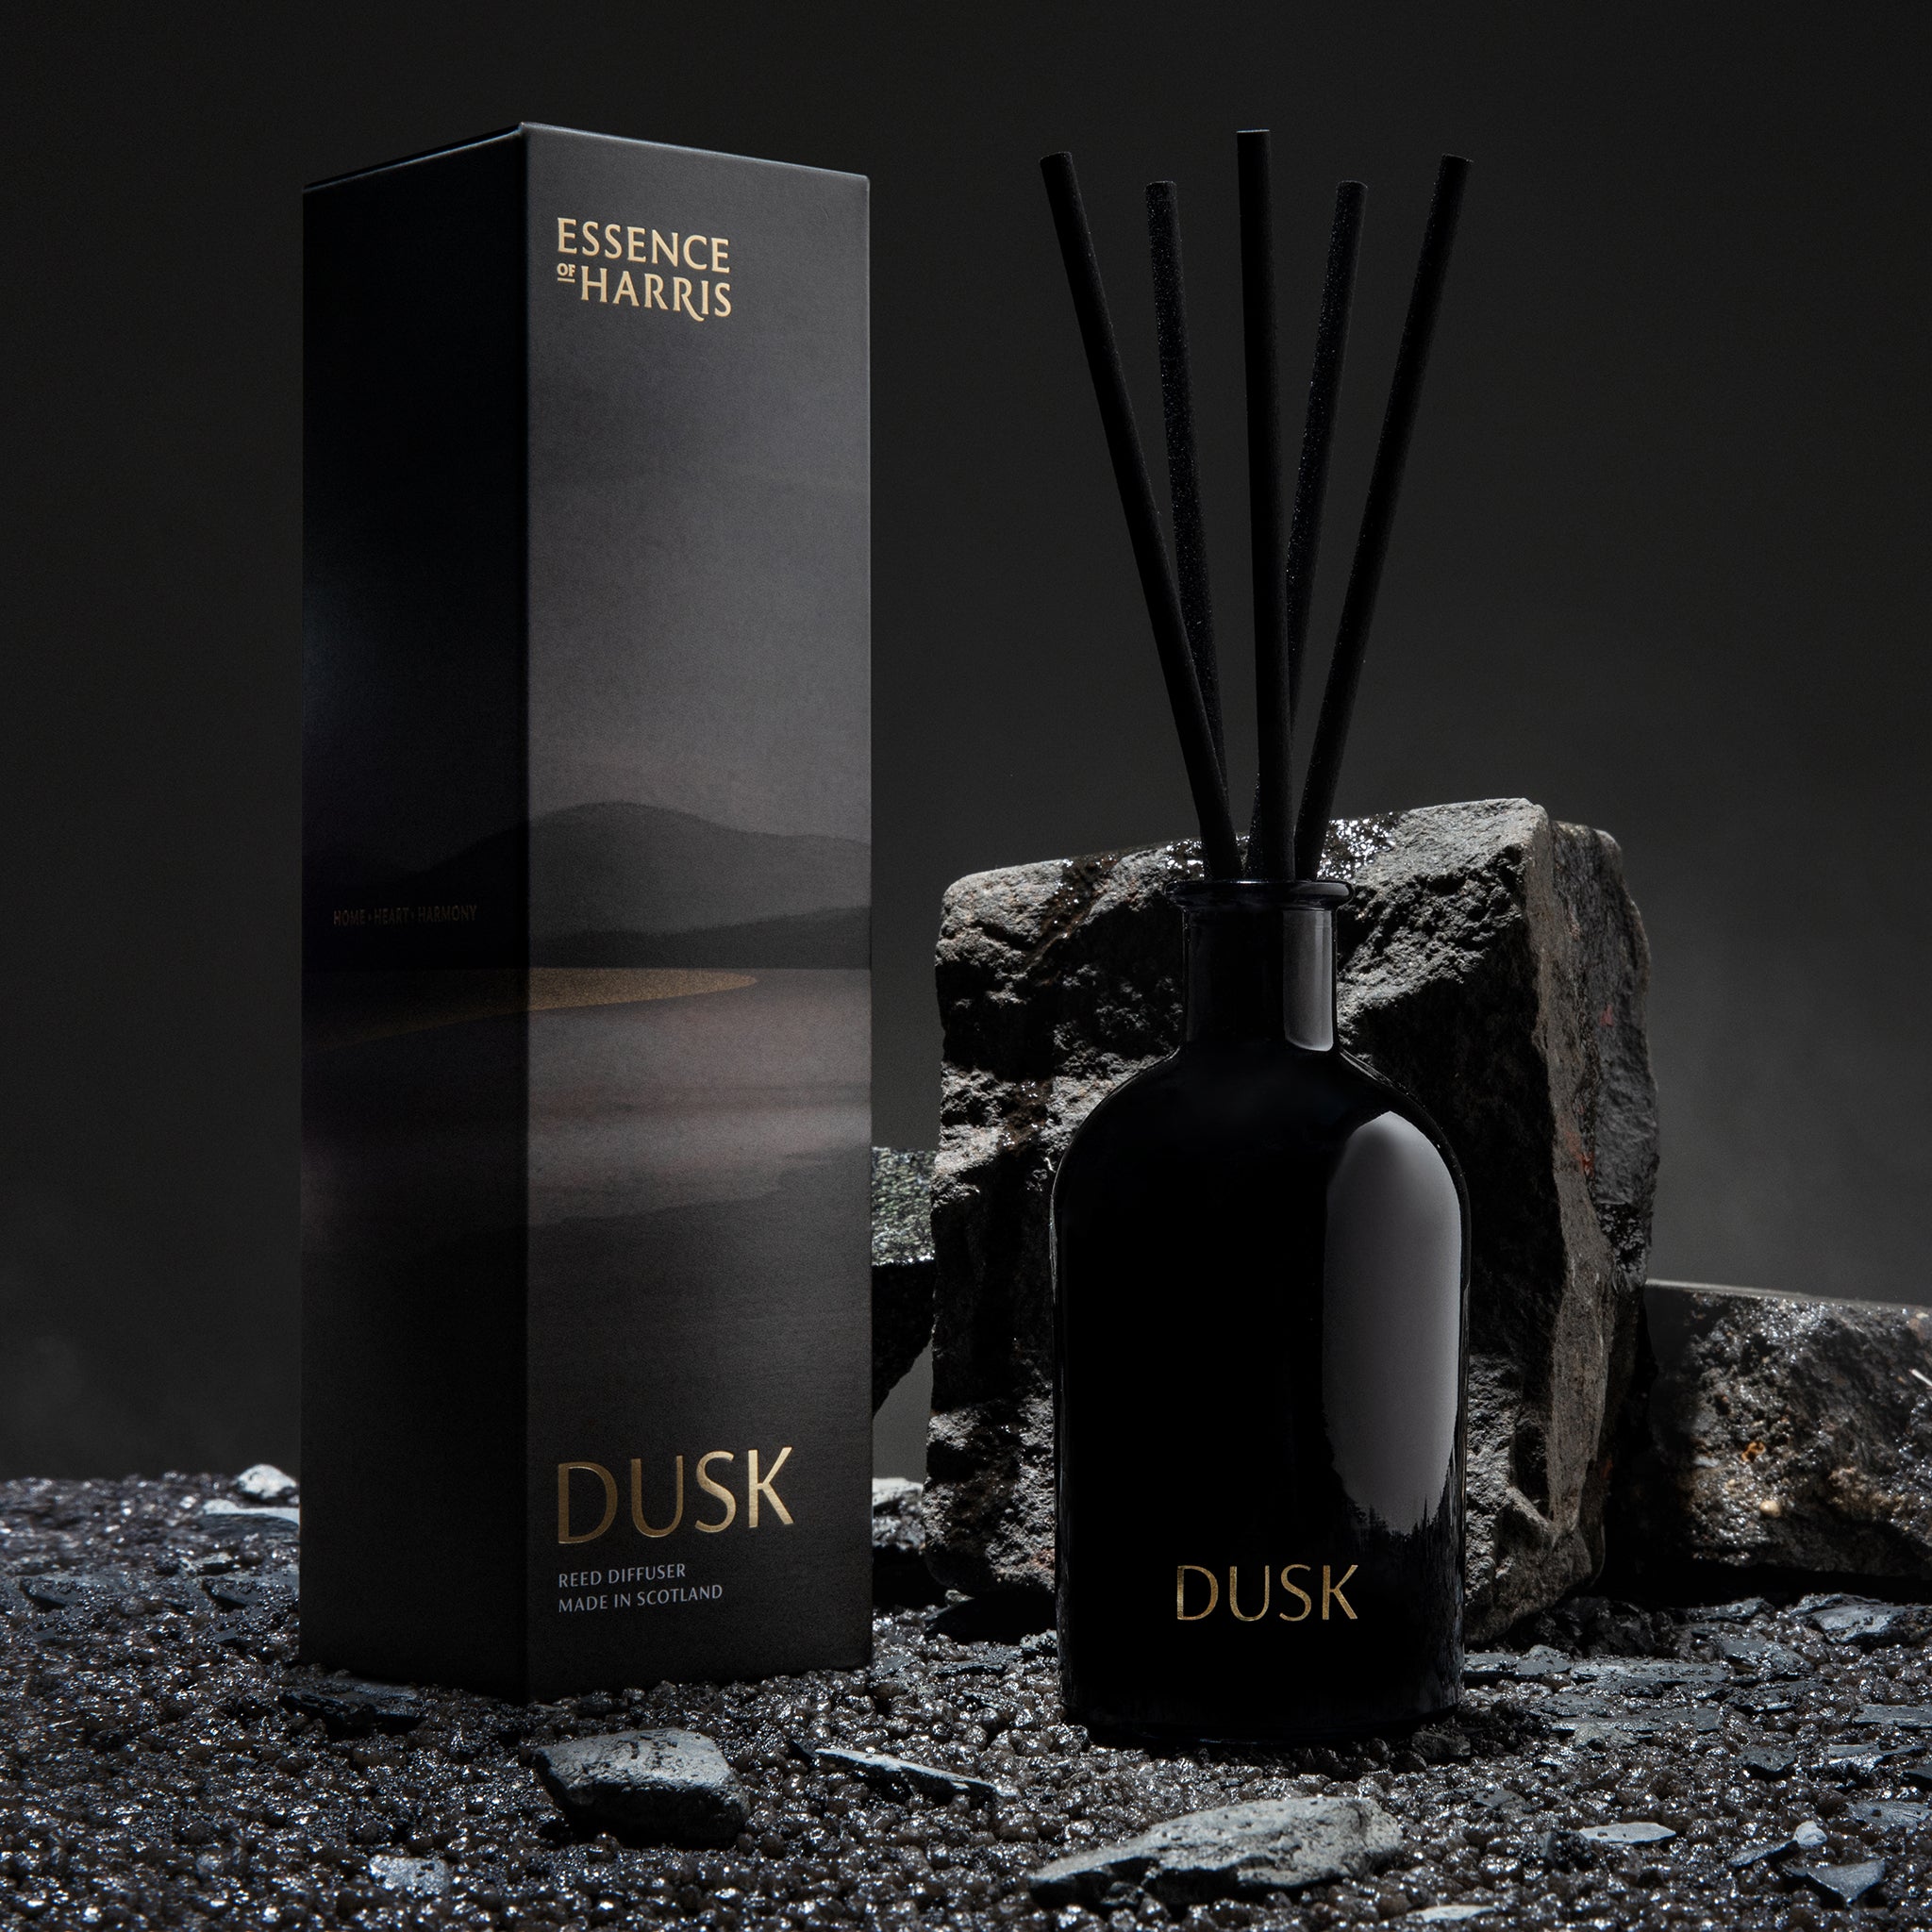 Dusk, wild rhubarb reed diffuser in black smoked glass bottle with gold writing next to sunset illustrated box